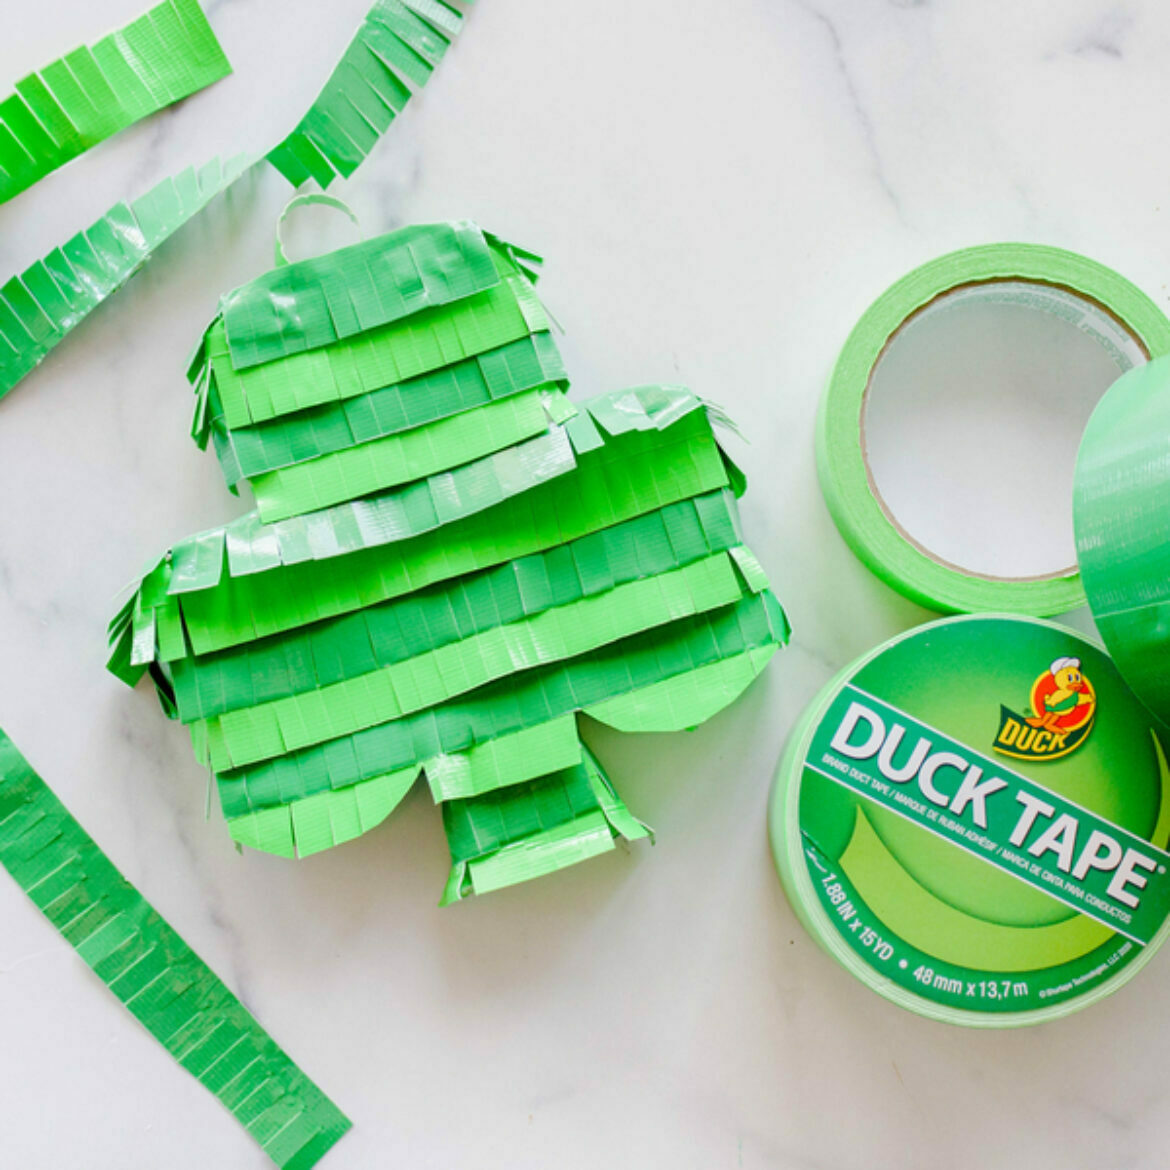 Shamrock shaped green piñata made with Duck tape.